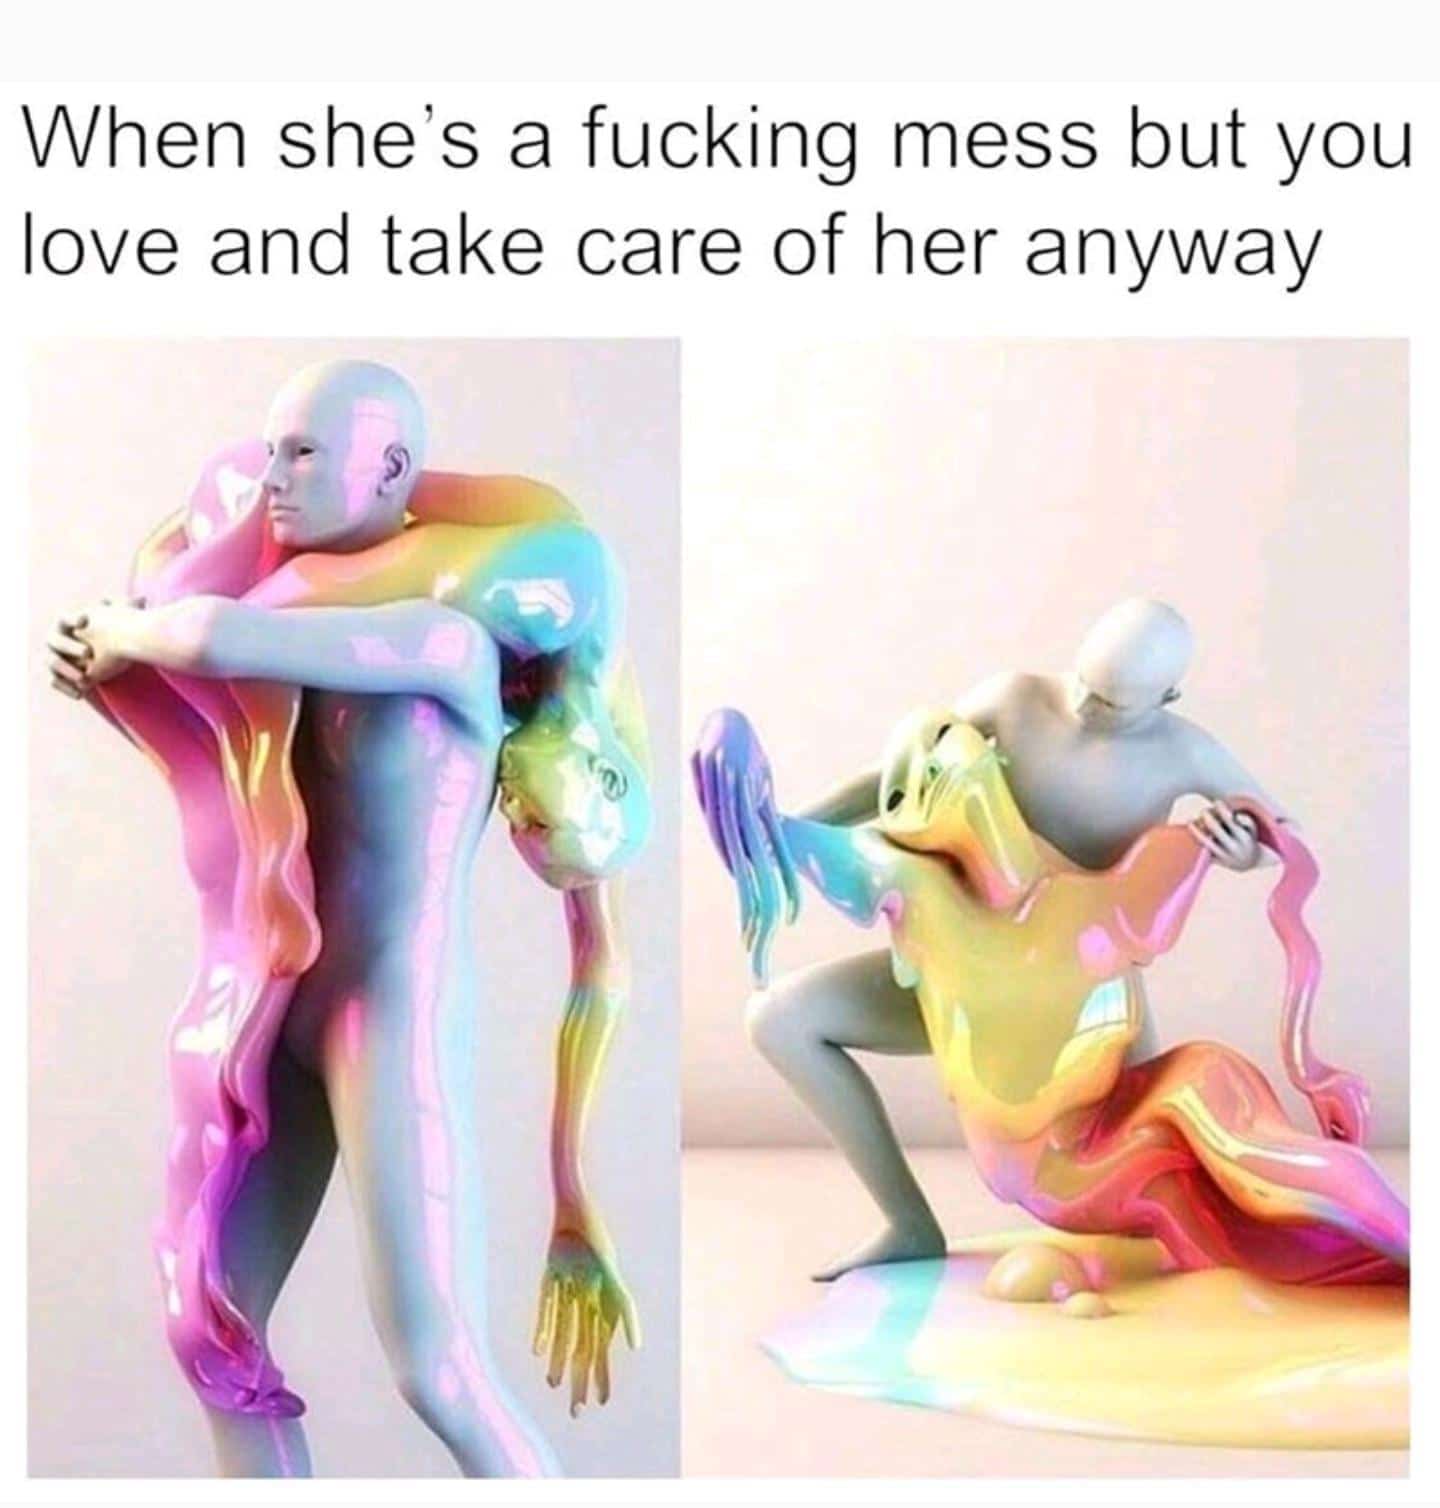 Wholesome memes, Love Wholesome Memes Wholesome memes, Love text: When she's a fucking mess but you love and take care of her anyway 